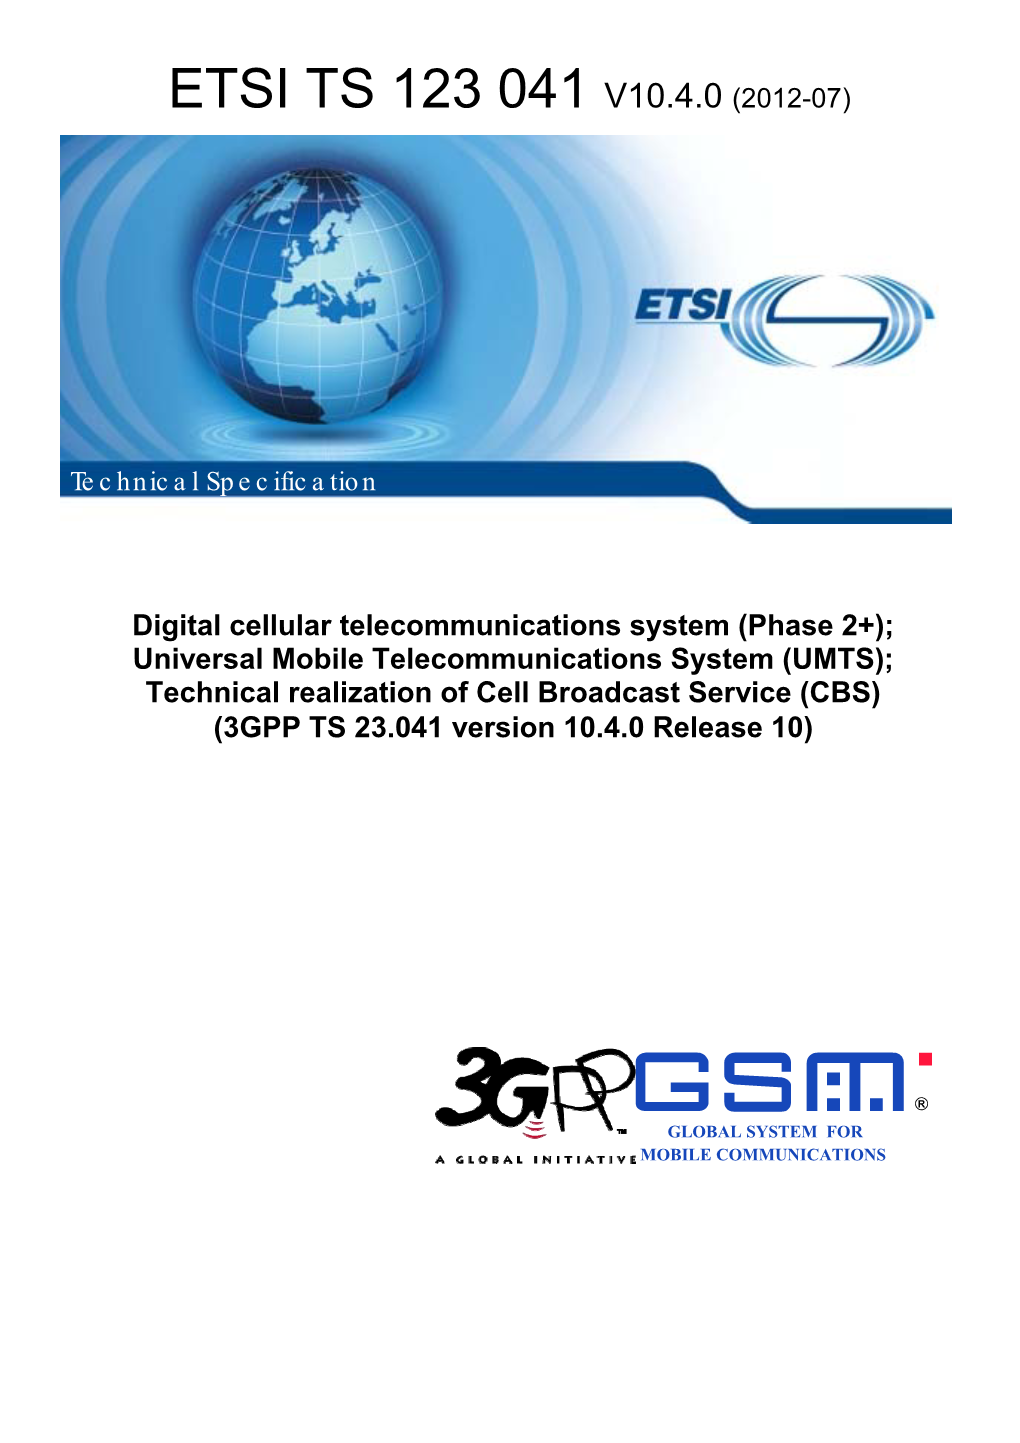 UMTS); Technical Realization of Cell Broadcast Service (CBS) (3GPP TS 23.041 Version 10.4.0 Release 10)